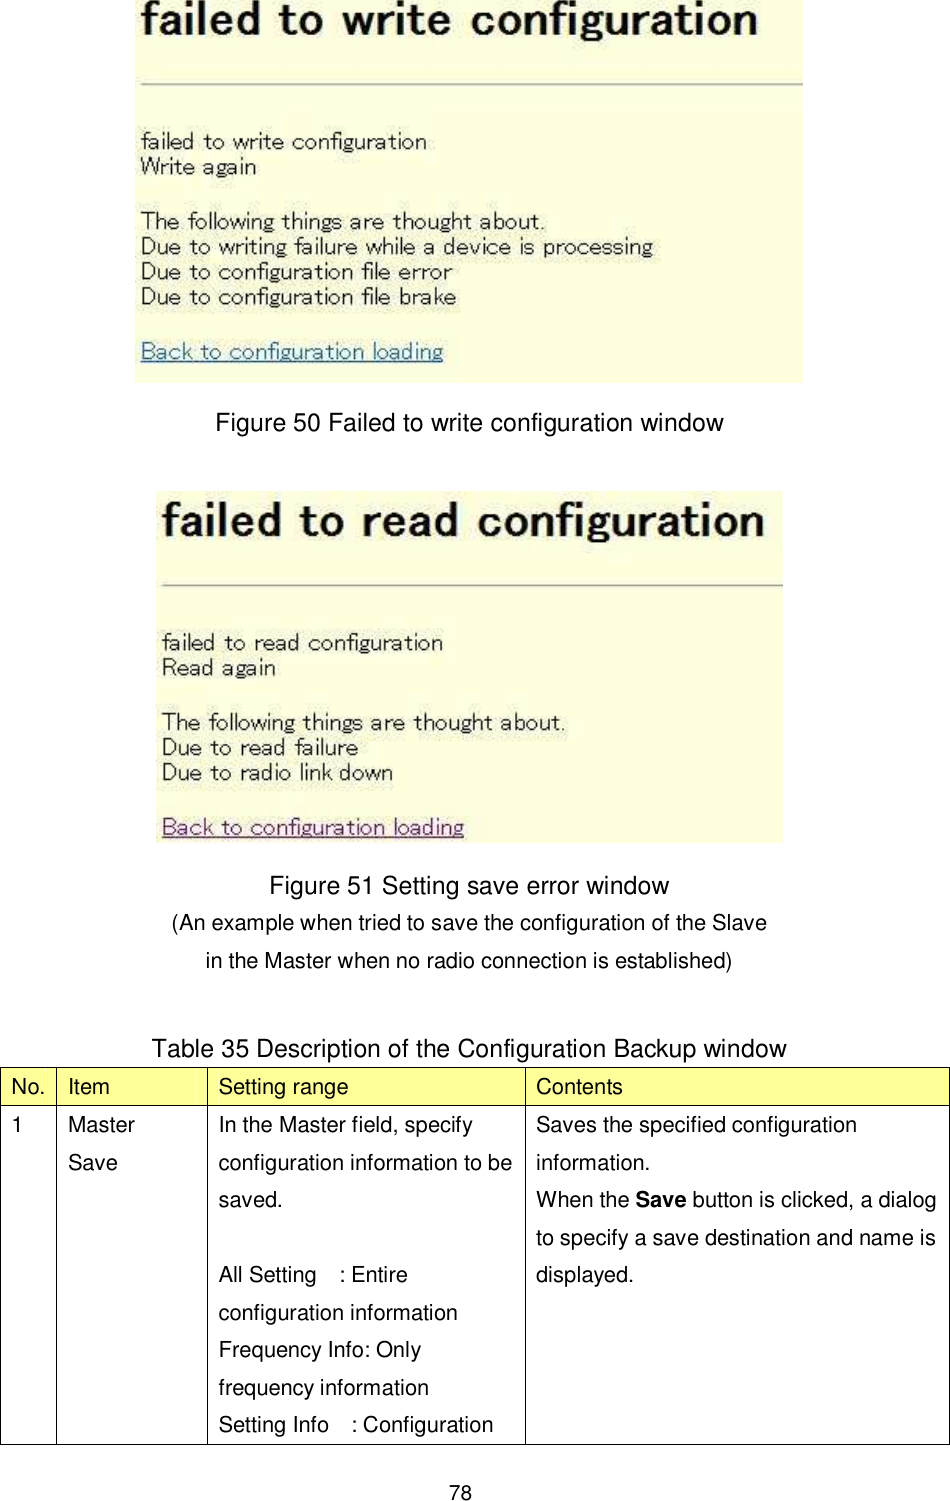    78  Figure 50 Failed to write configuration window   Figure 51 Setting save error window (An example when tried to save the configuration of the Slave in the Master when no radio connection is established)  Table 35 Description of the Configuration Backup window No. Item  Setting range  Contents 1  Master Save In the Master field, specify configuration information to be saved.  All Setting    : Entire configuration information Frequency Info: Only frequency information Setting Info    : Configuration Saves the specified configuration information. When the Save button is clicked, a dialog to specify a save destination and name is displayed. 